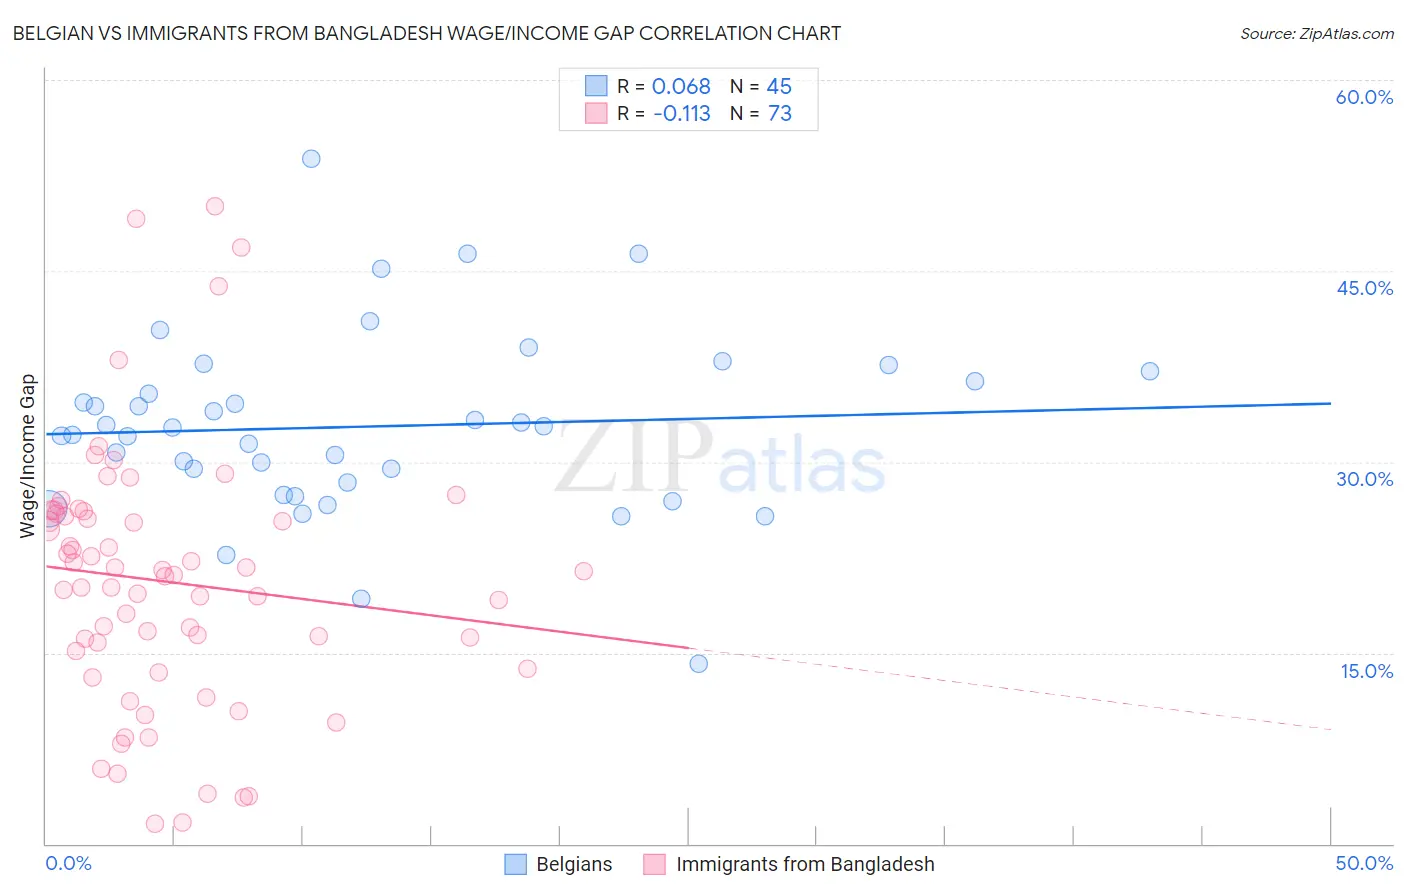 Belgian vs Immigrants from Bangladesh Wage/Income Gap